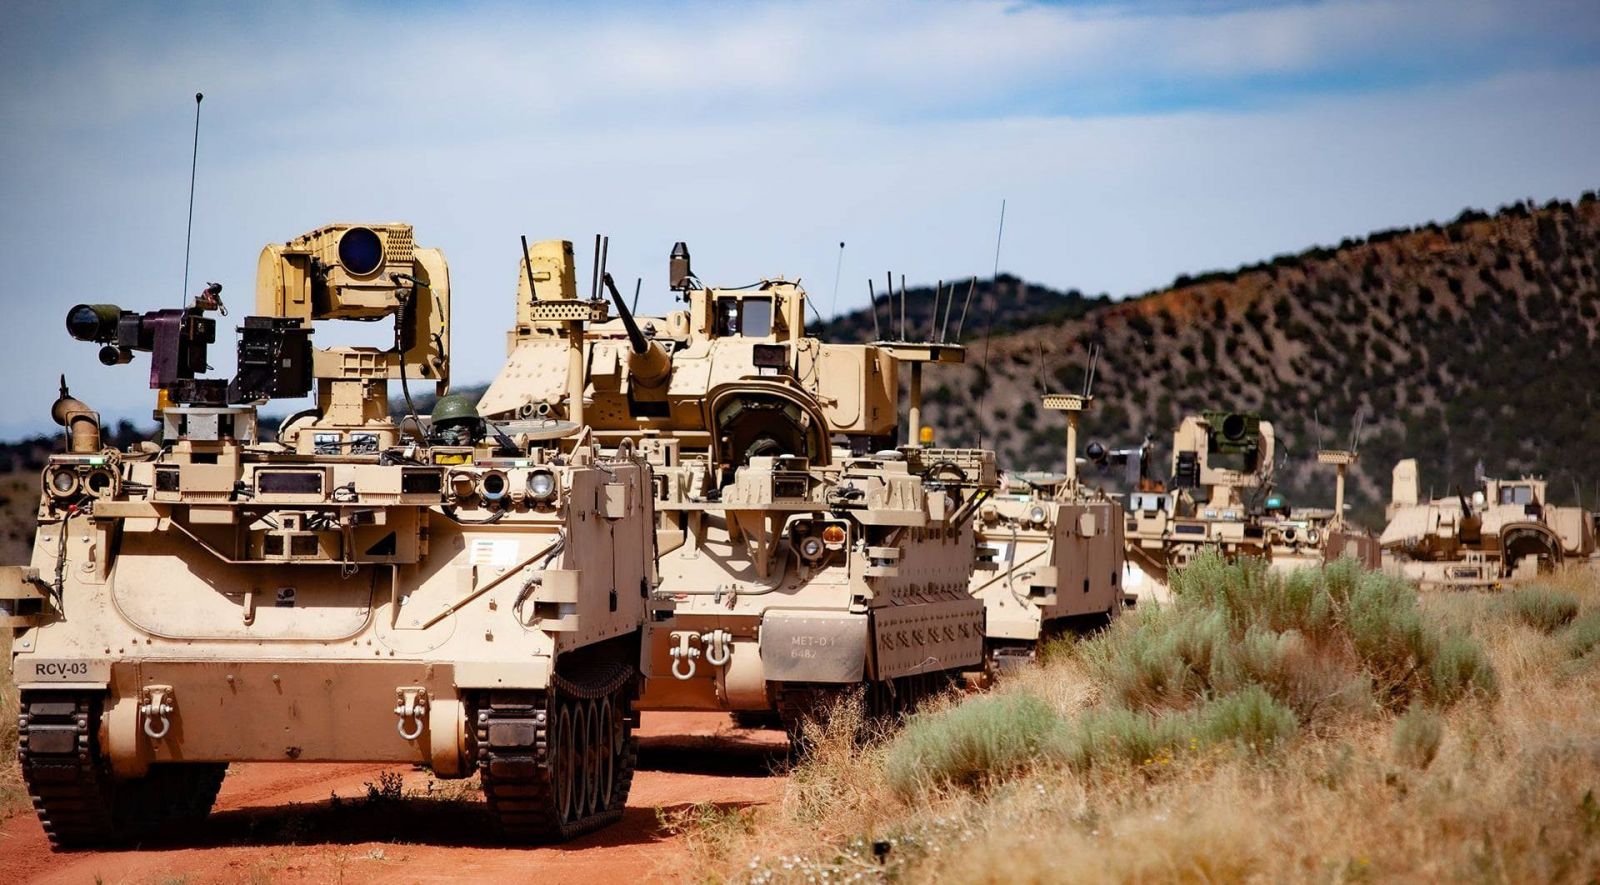 Modified Bradley Fighting Vehicles and robotic combatic vehicles were used for an experimentation project this past summer at Fort Carson, Colo. (Photo/Provided)